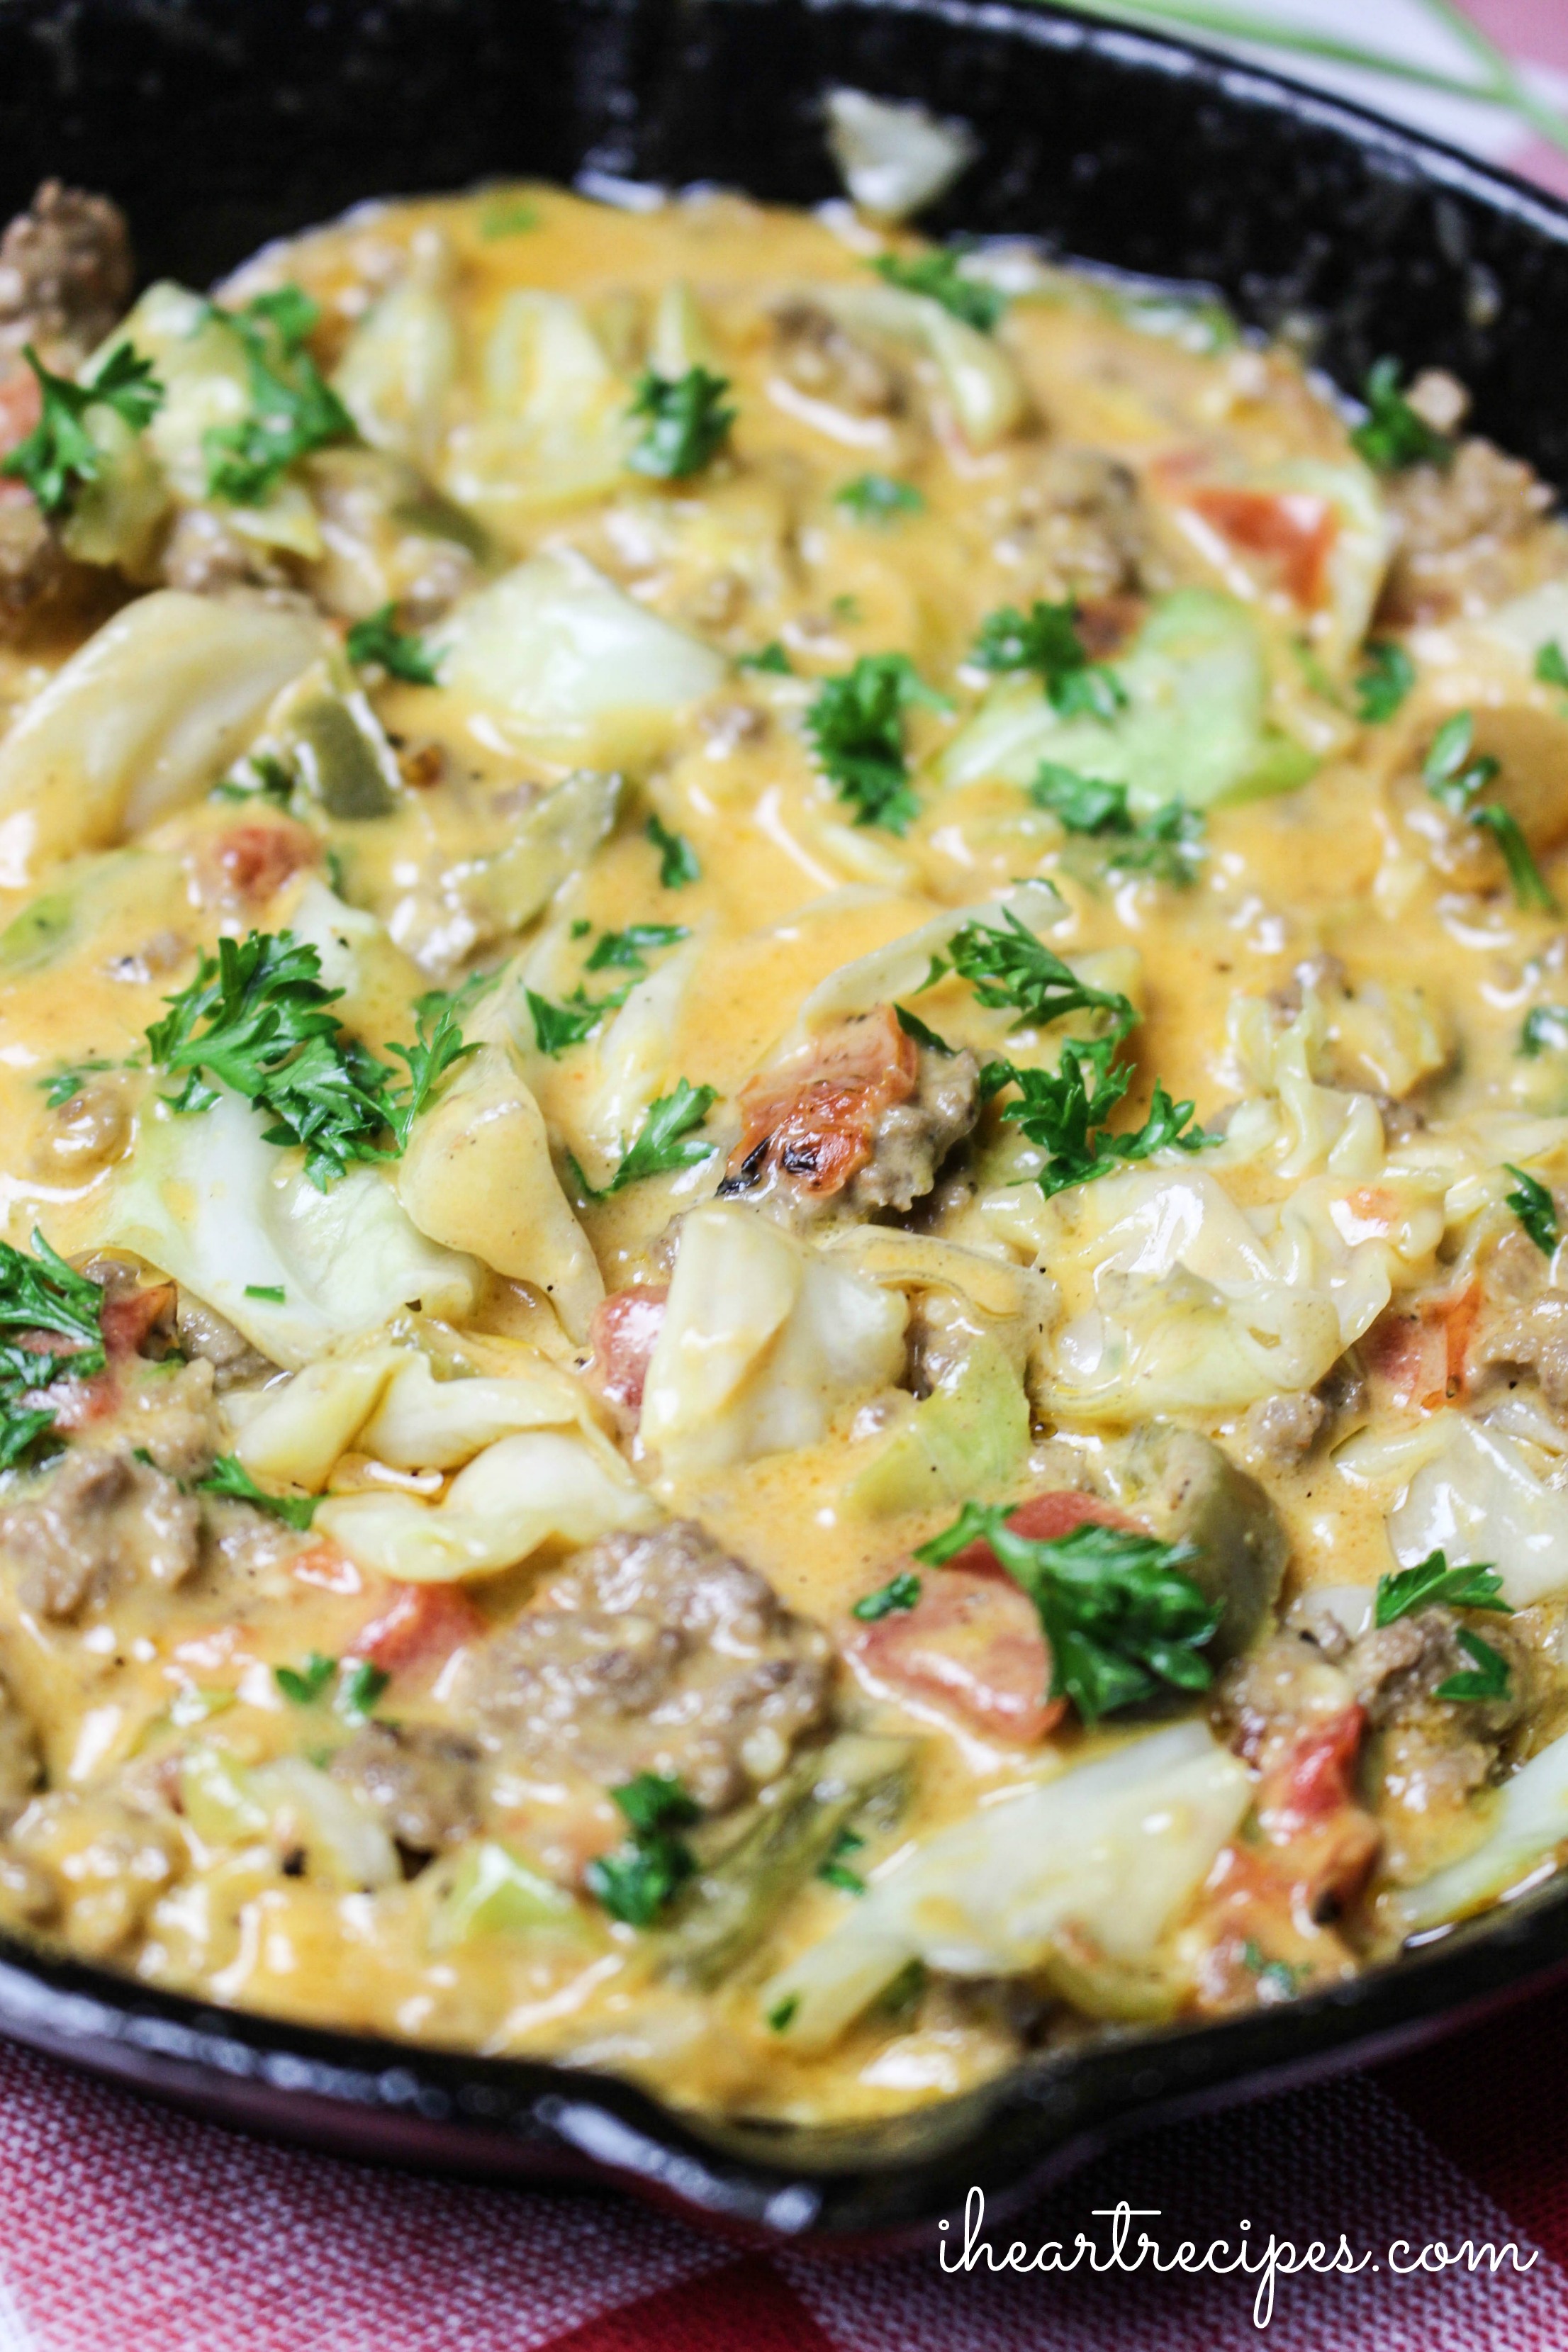 Creamy Cheesy Cabbage Creole topped with bits of bright green parsley served in a cast iron skillet. This is a meal the whole family will love!